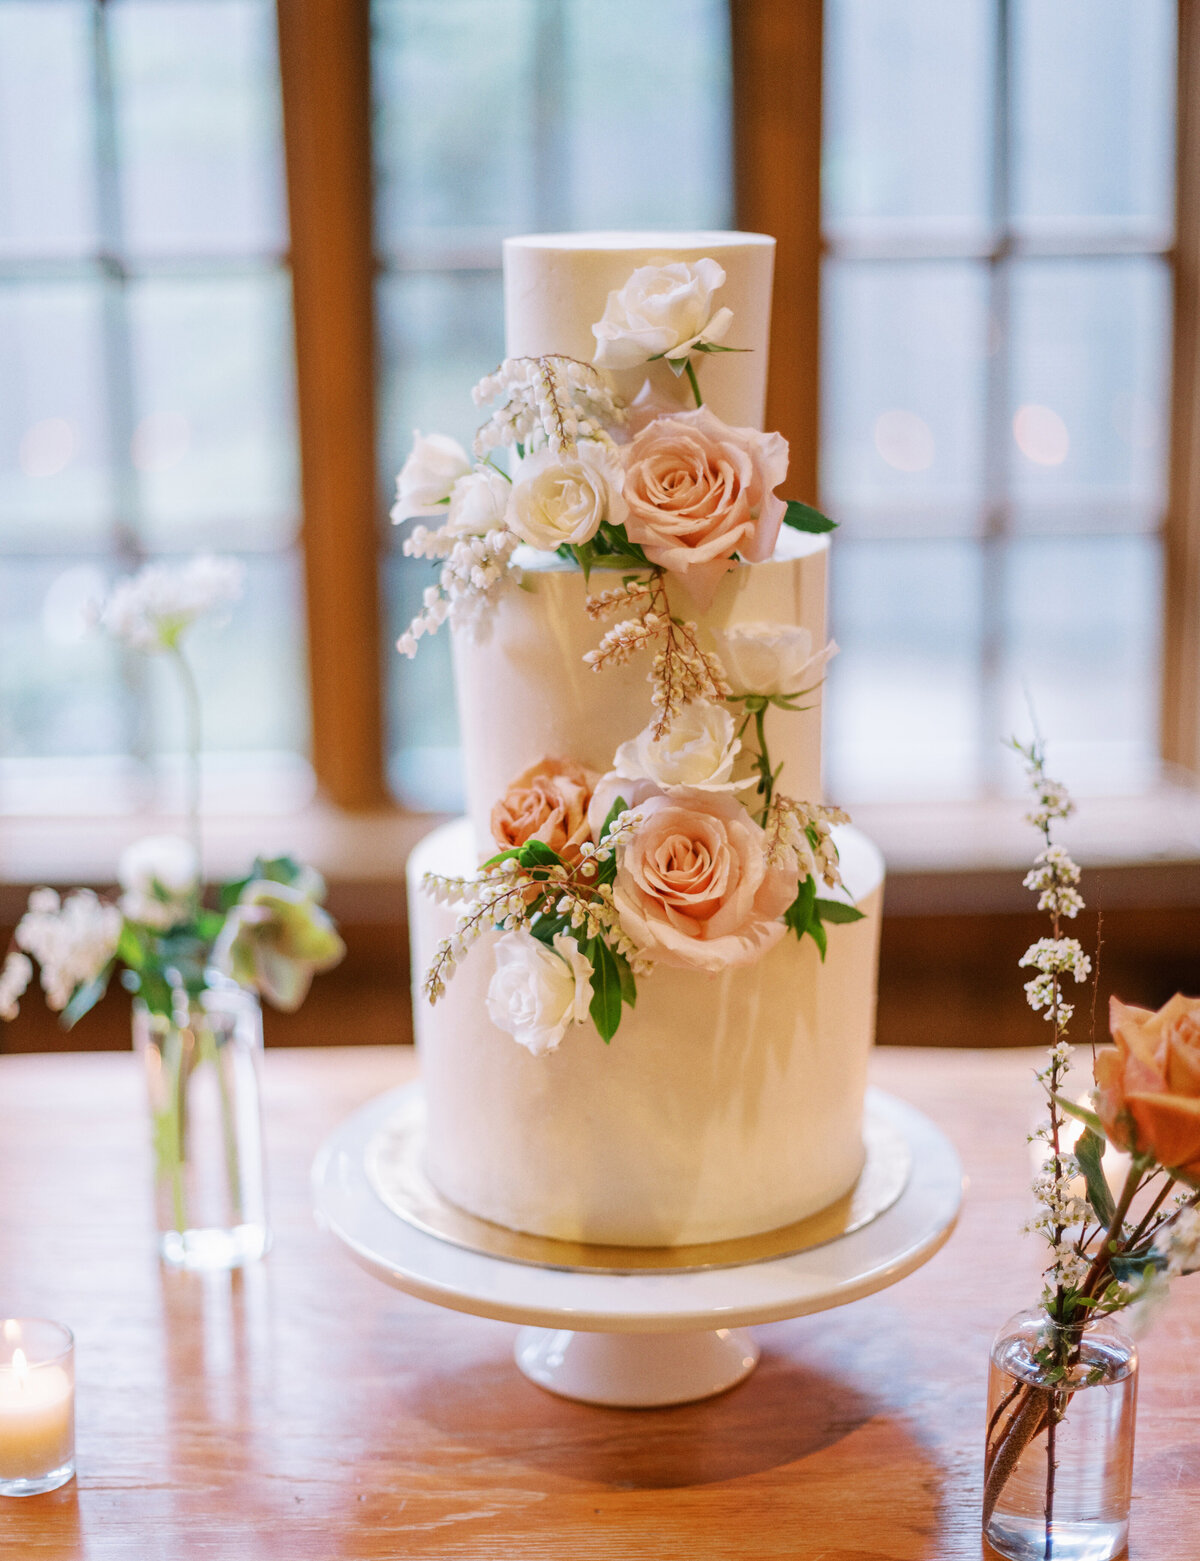 classic white wedding cake with romantic floral